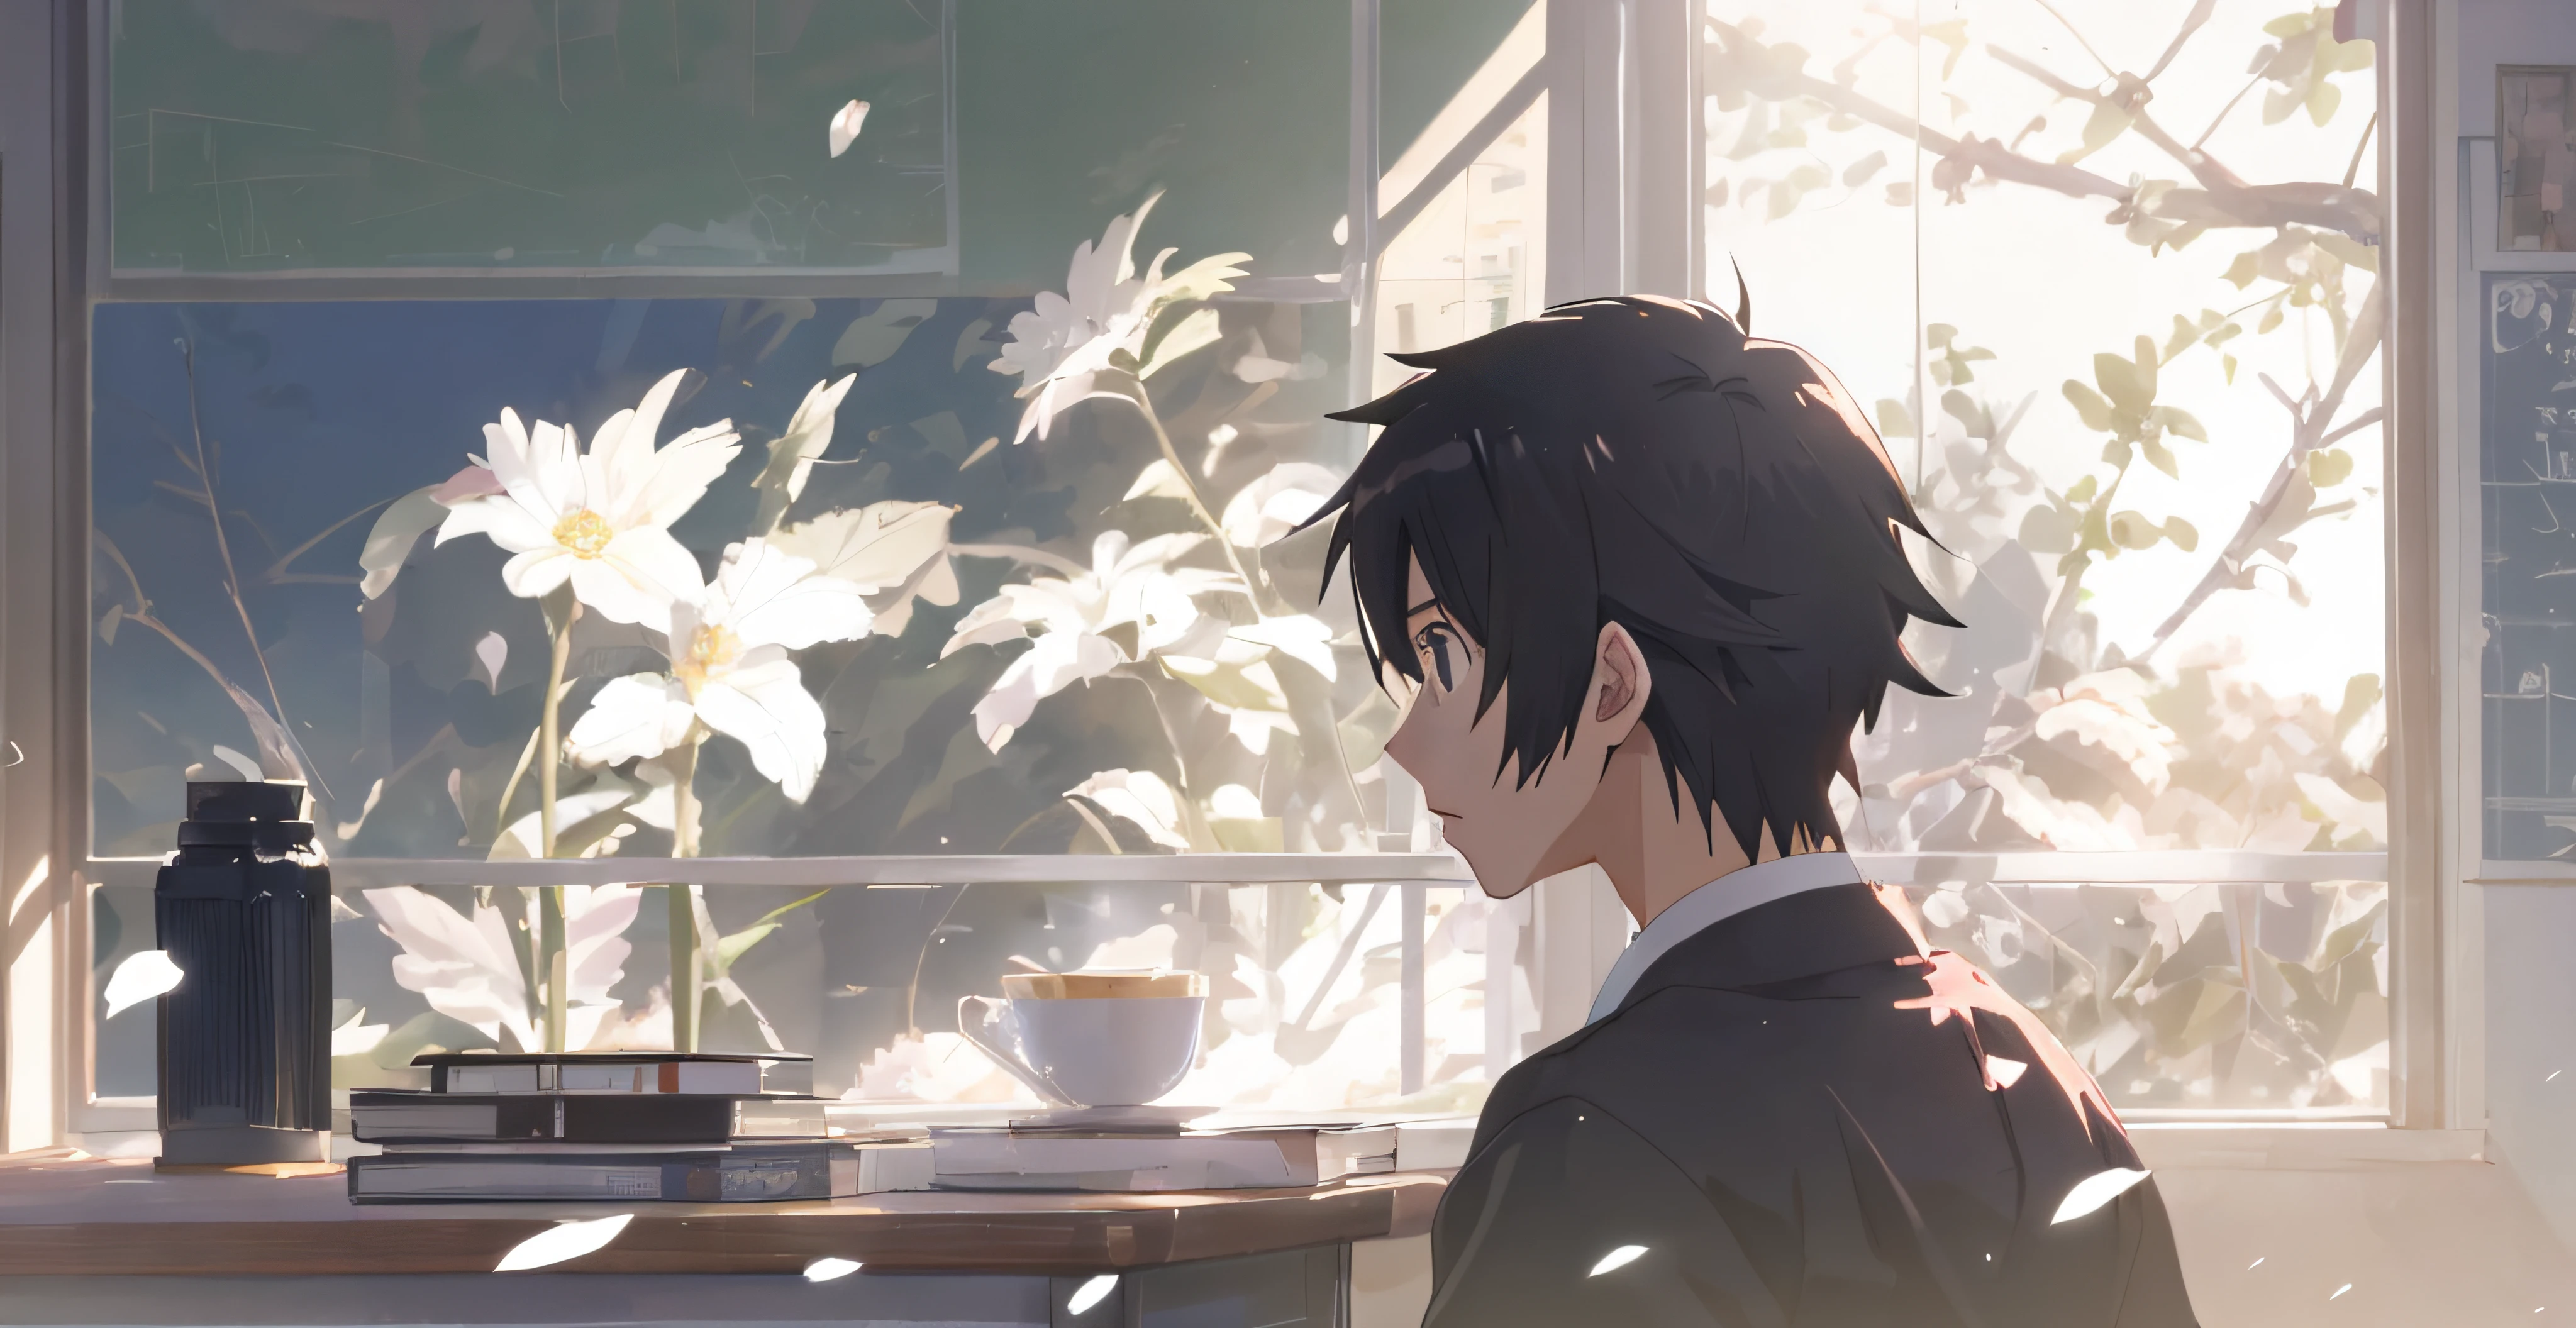 (best quality), (masterpiece), high details, extremely_detailed_CG_unity_8k_wallpaper, man reading in tie, classroom window, white petals, hyperrealism, strong contrast between light and shadow, Makoto Shinkai. —H 2160, Anime Aesthetics, ((Makoto Shinkai)), Makoto Shinkai style, Aesthetic award winning anime, Makoto Shinkai style, Guvitz and Makoto Shinkai style, Makoto Shinkai style